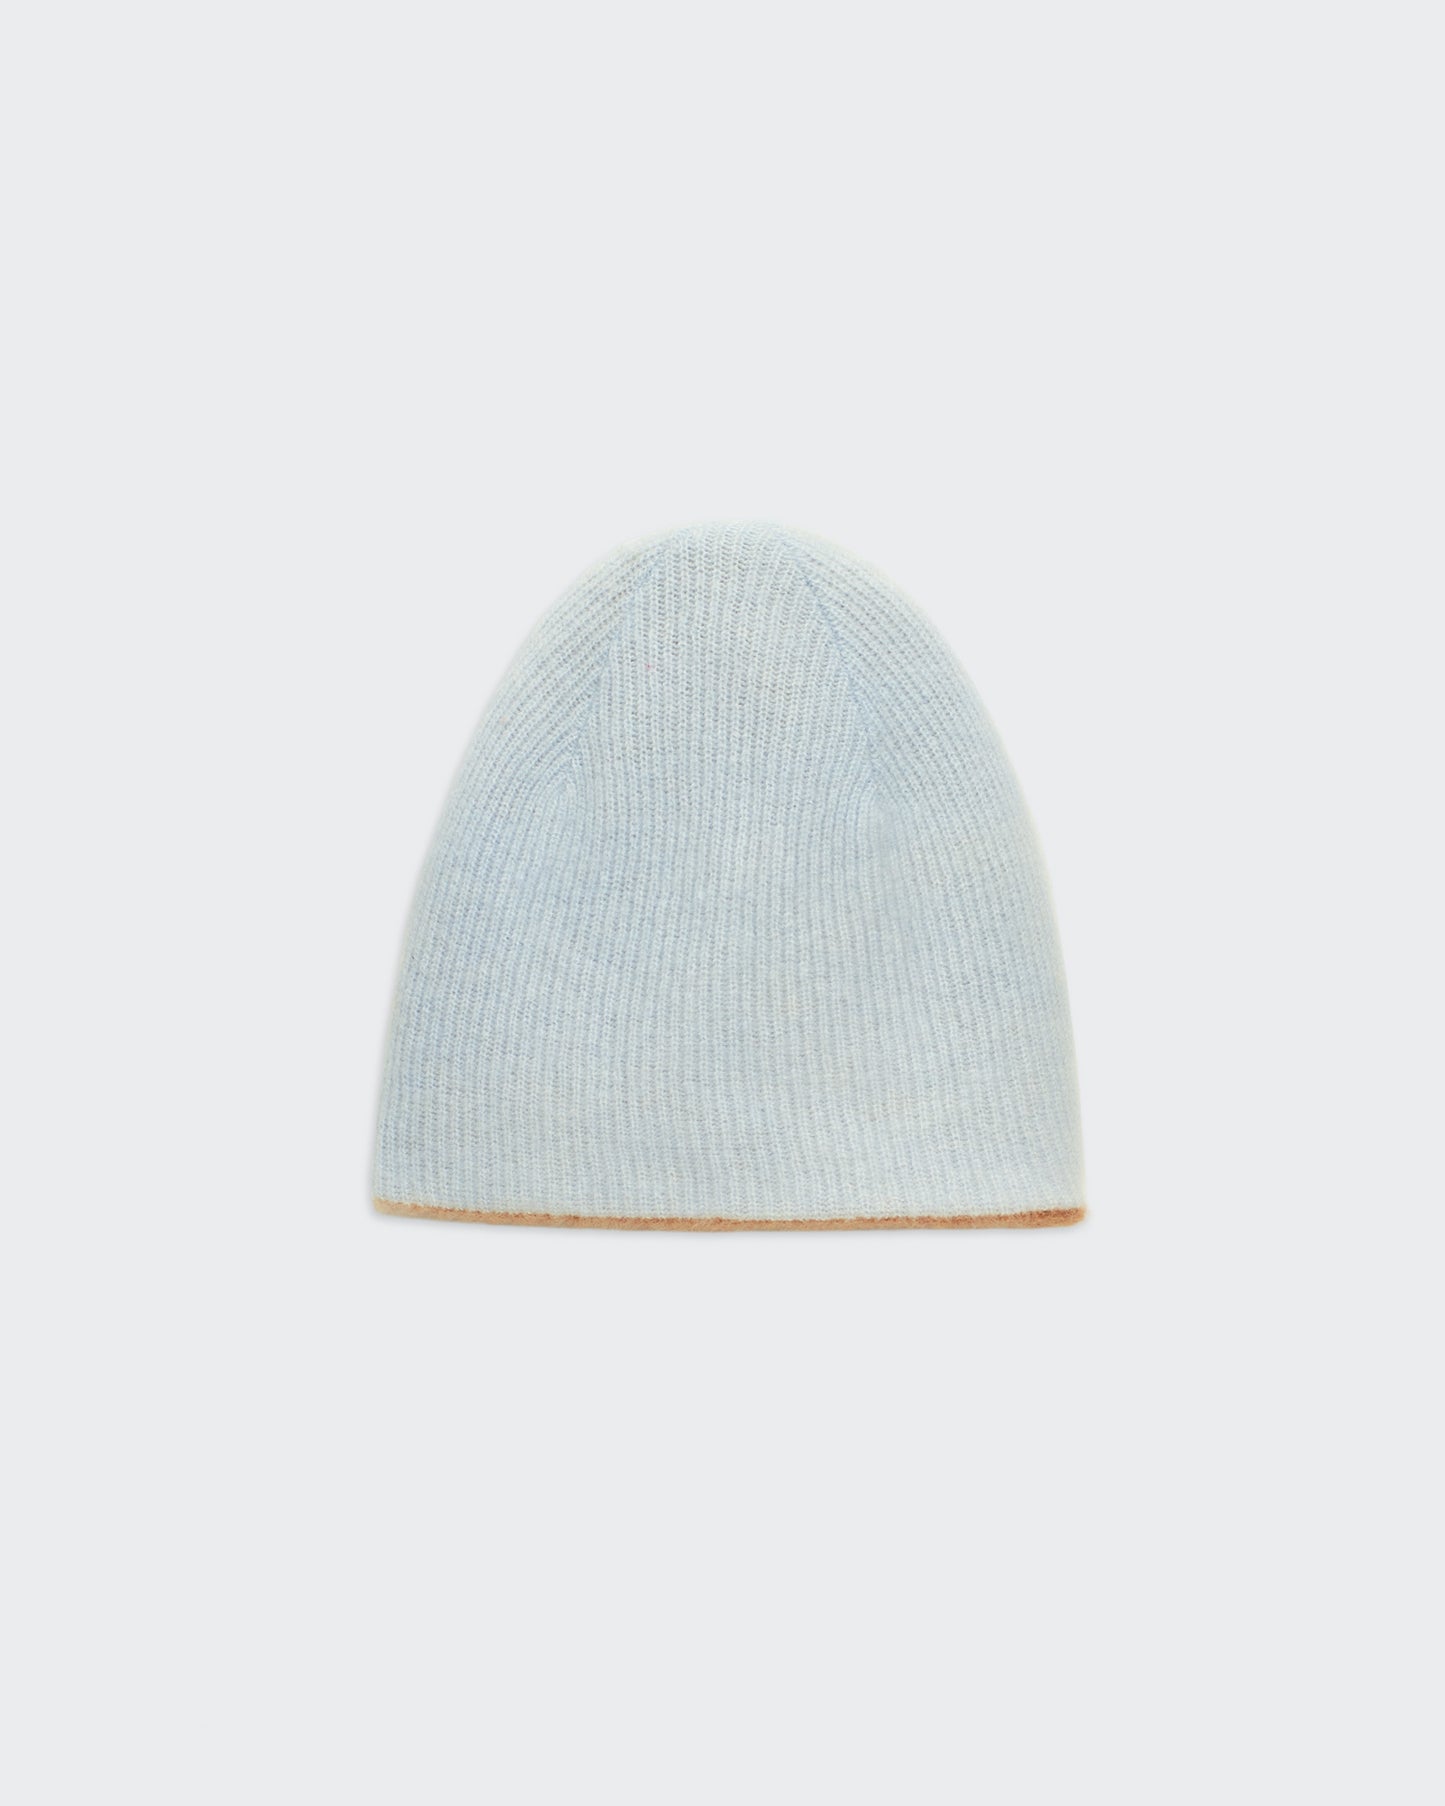 The Grizzly Reversible Beanie - Almond/Sky